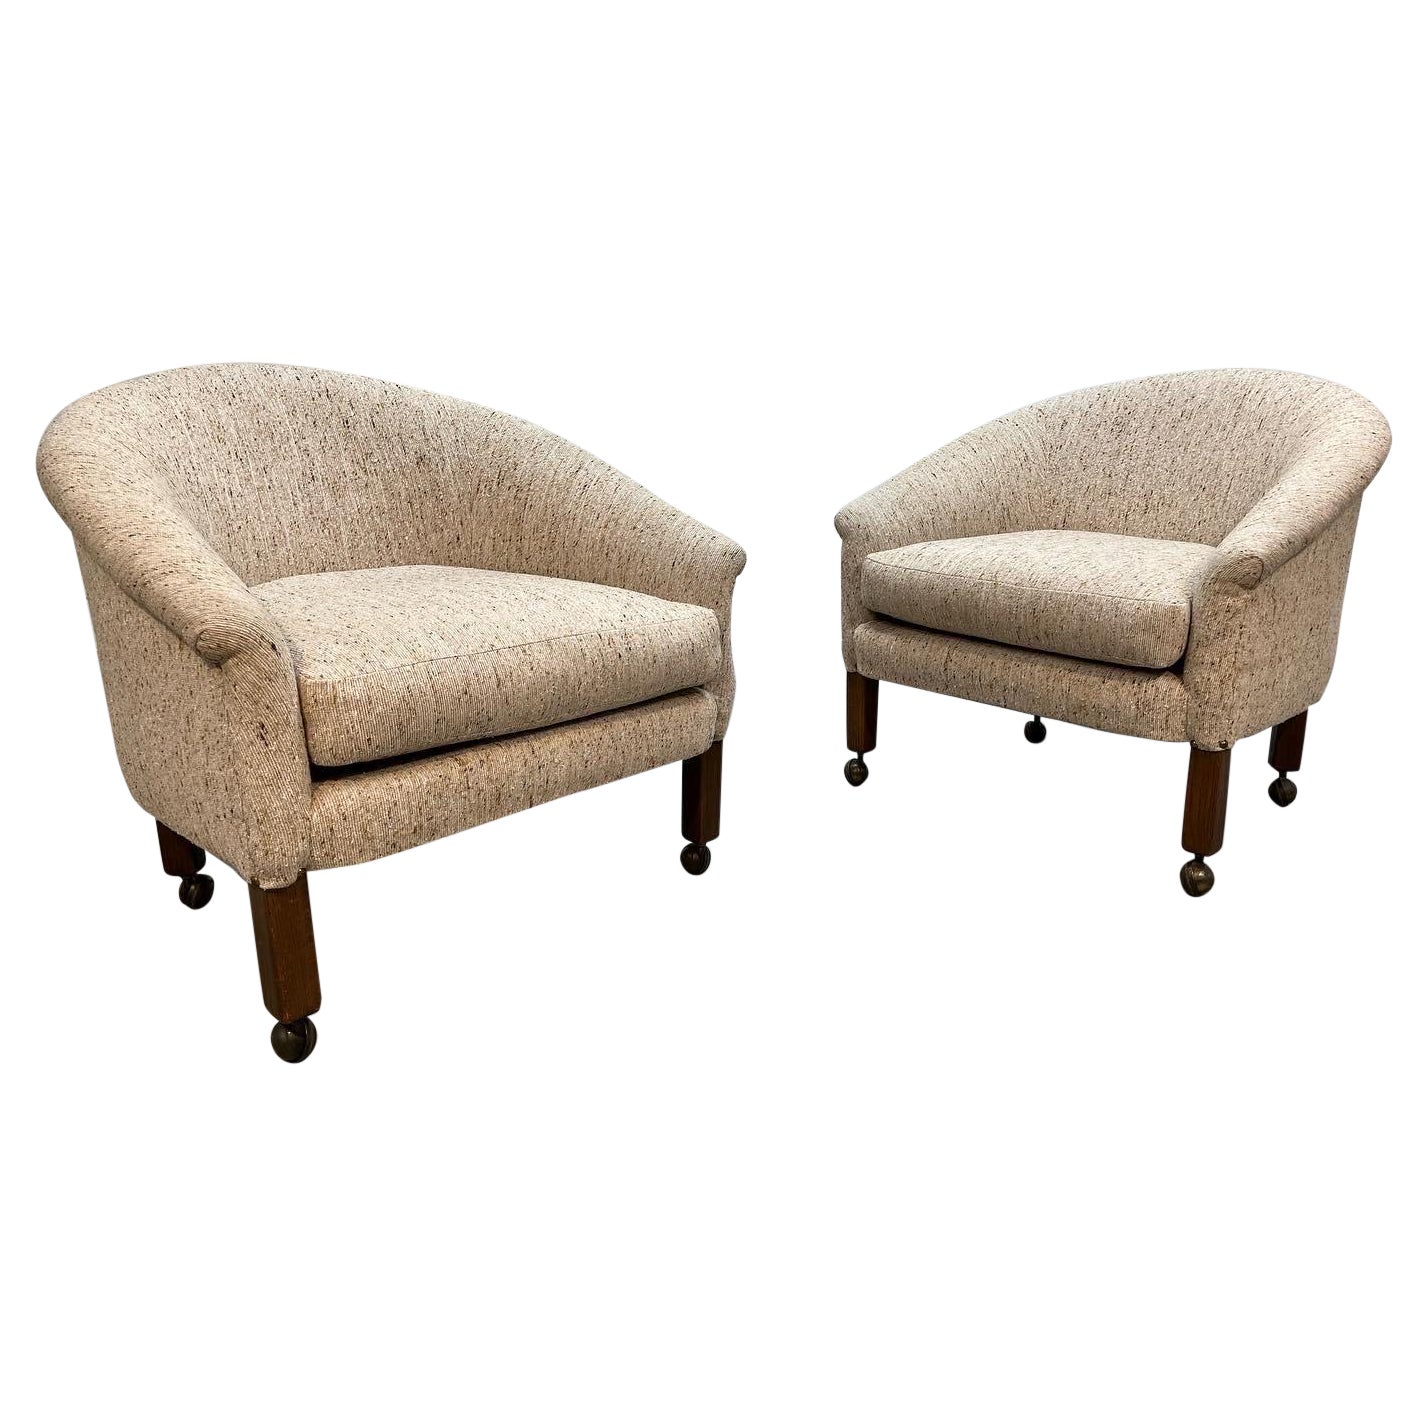 Pair of Mid-Century Barrel Back Club Chairs After Milo Baughman by Flexsteel